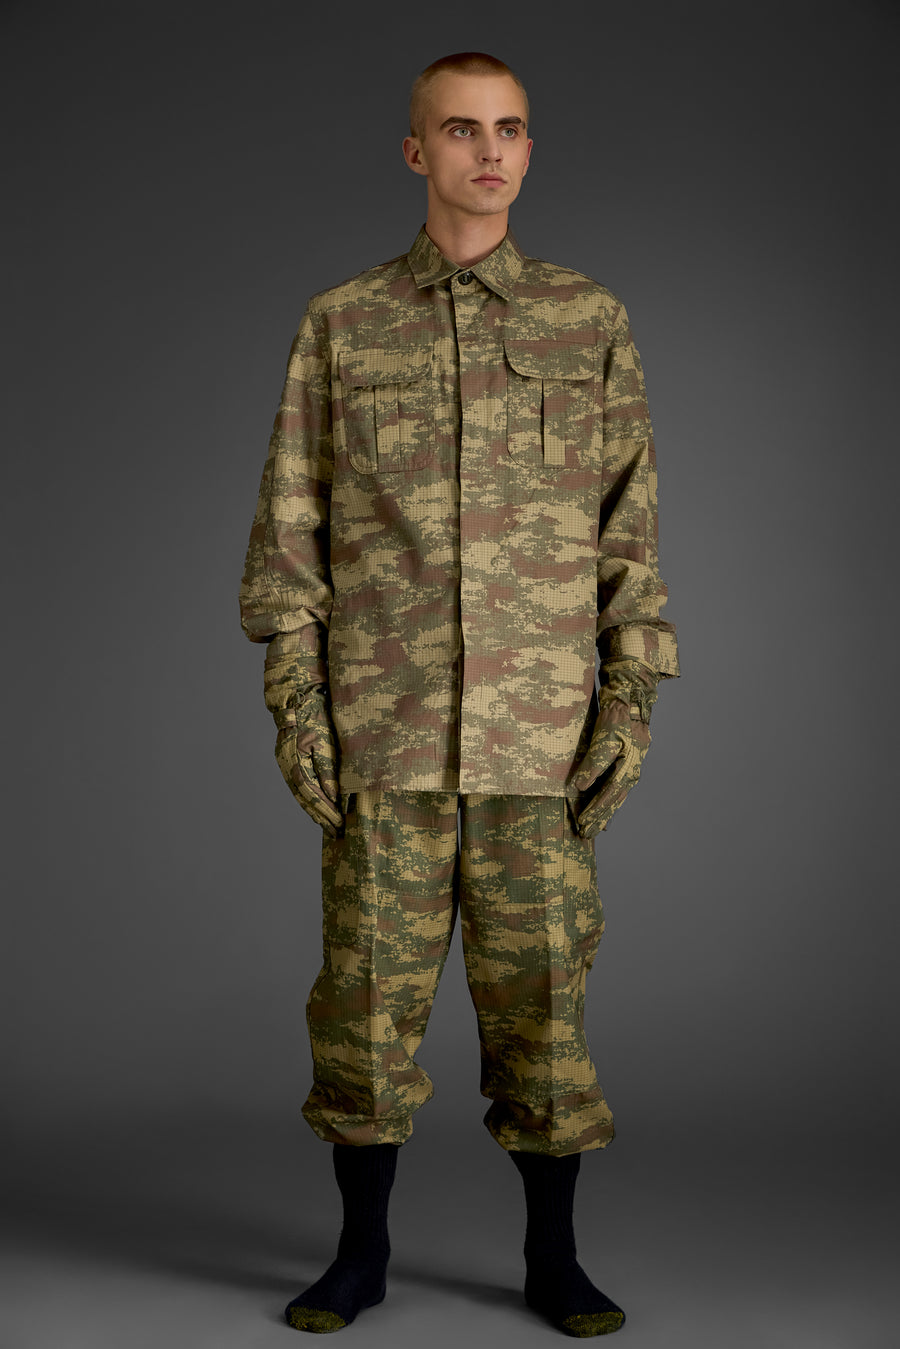 Designed for land forces with ripstop fabric